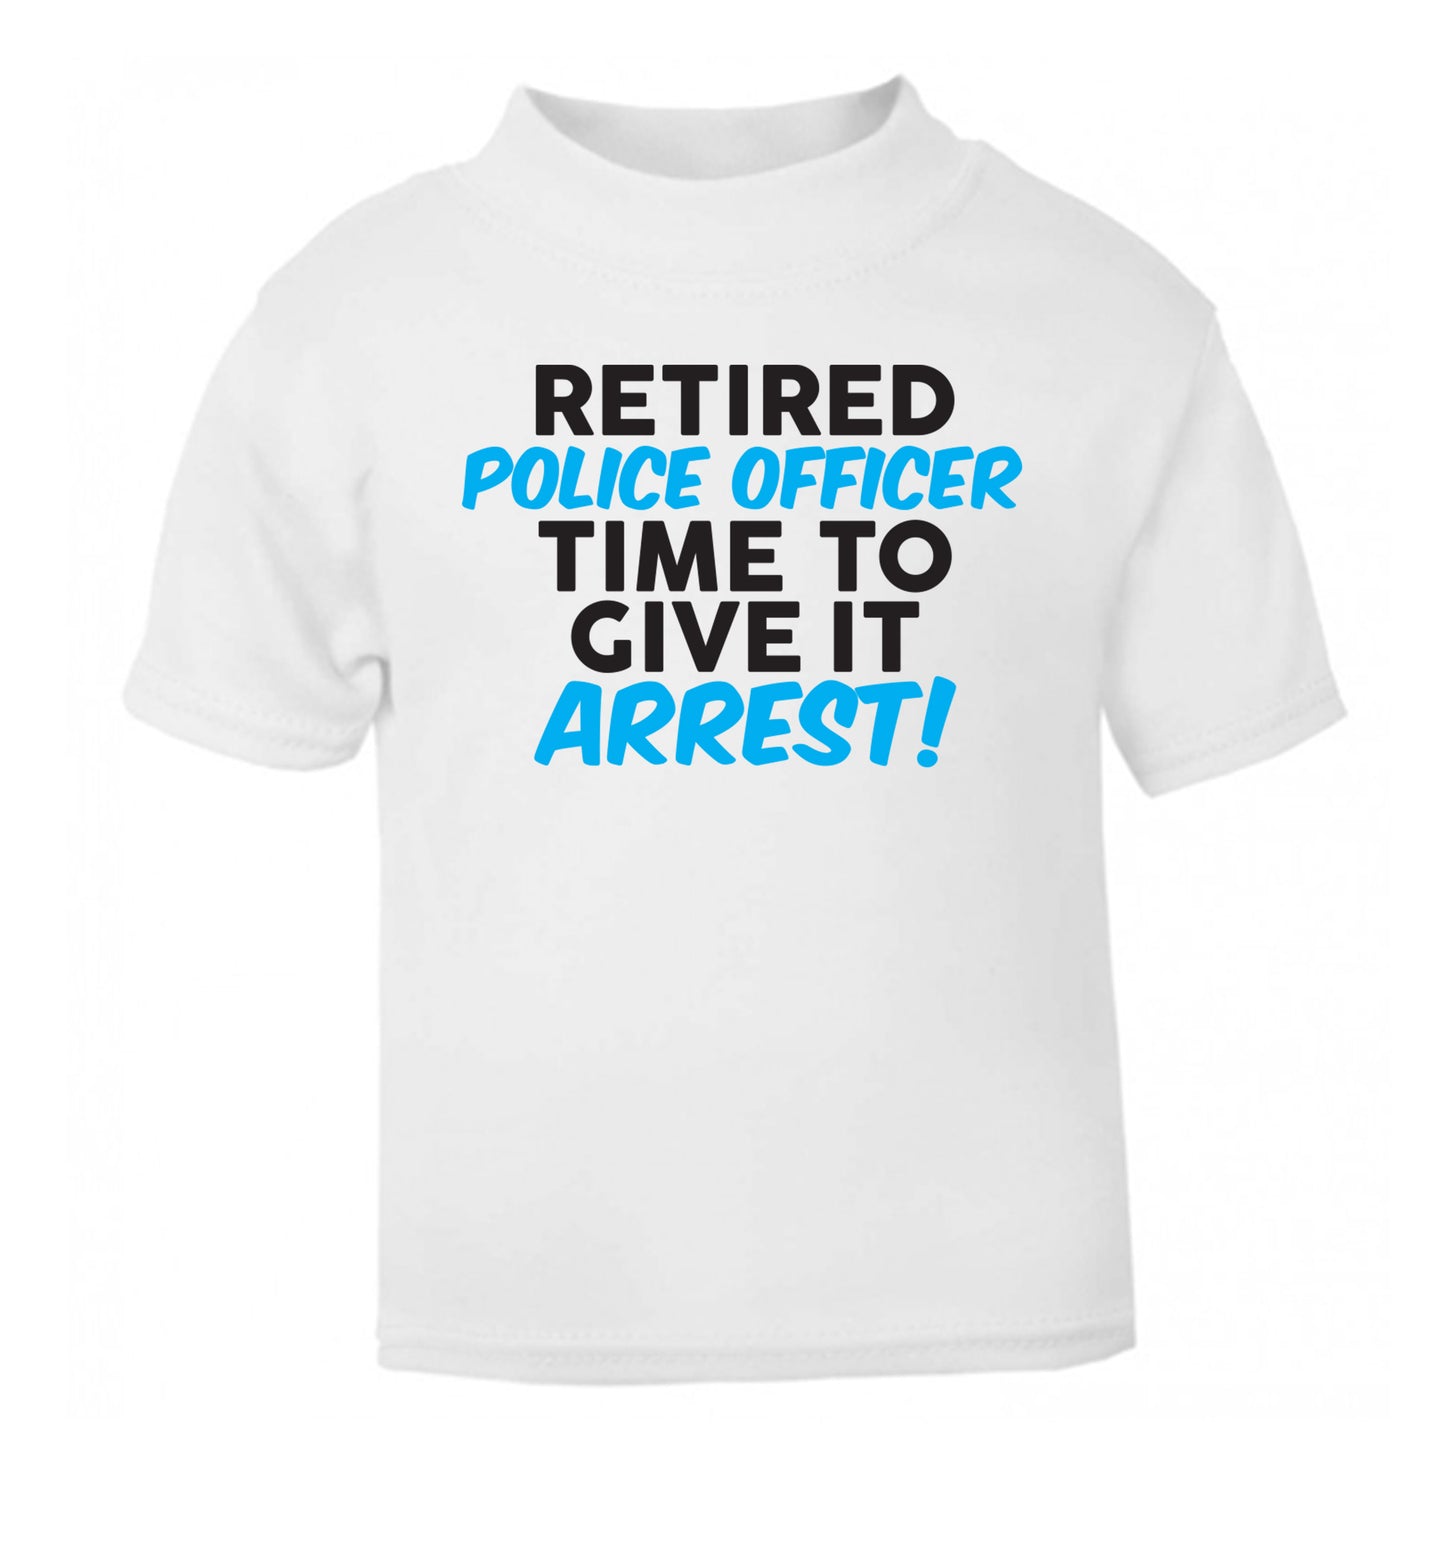 Retired police officer time to give it arrest white Baby Toddler Tshirt 2 Years